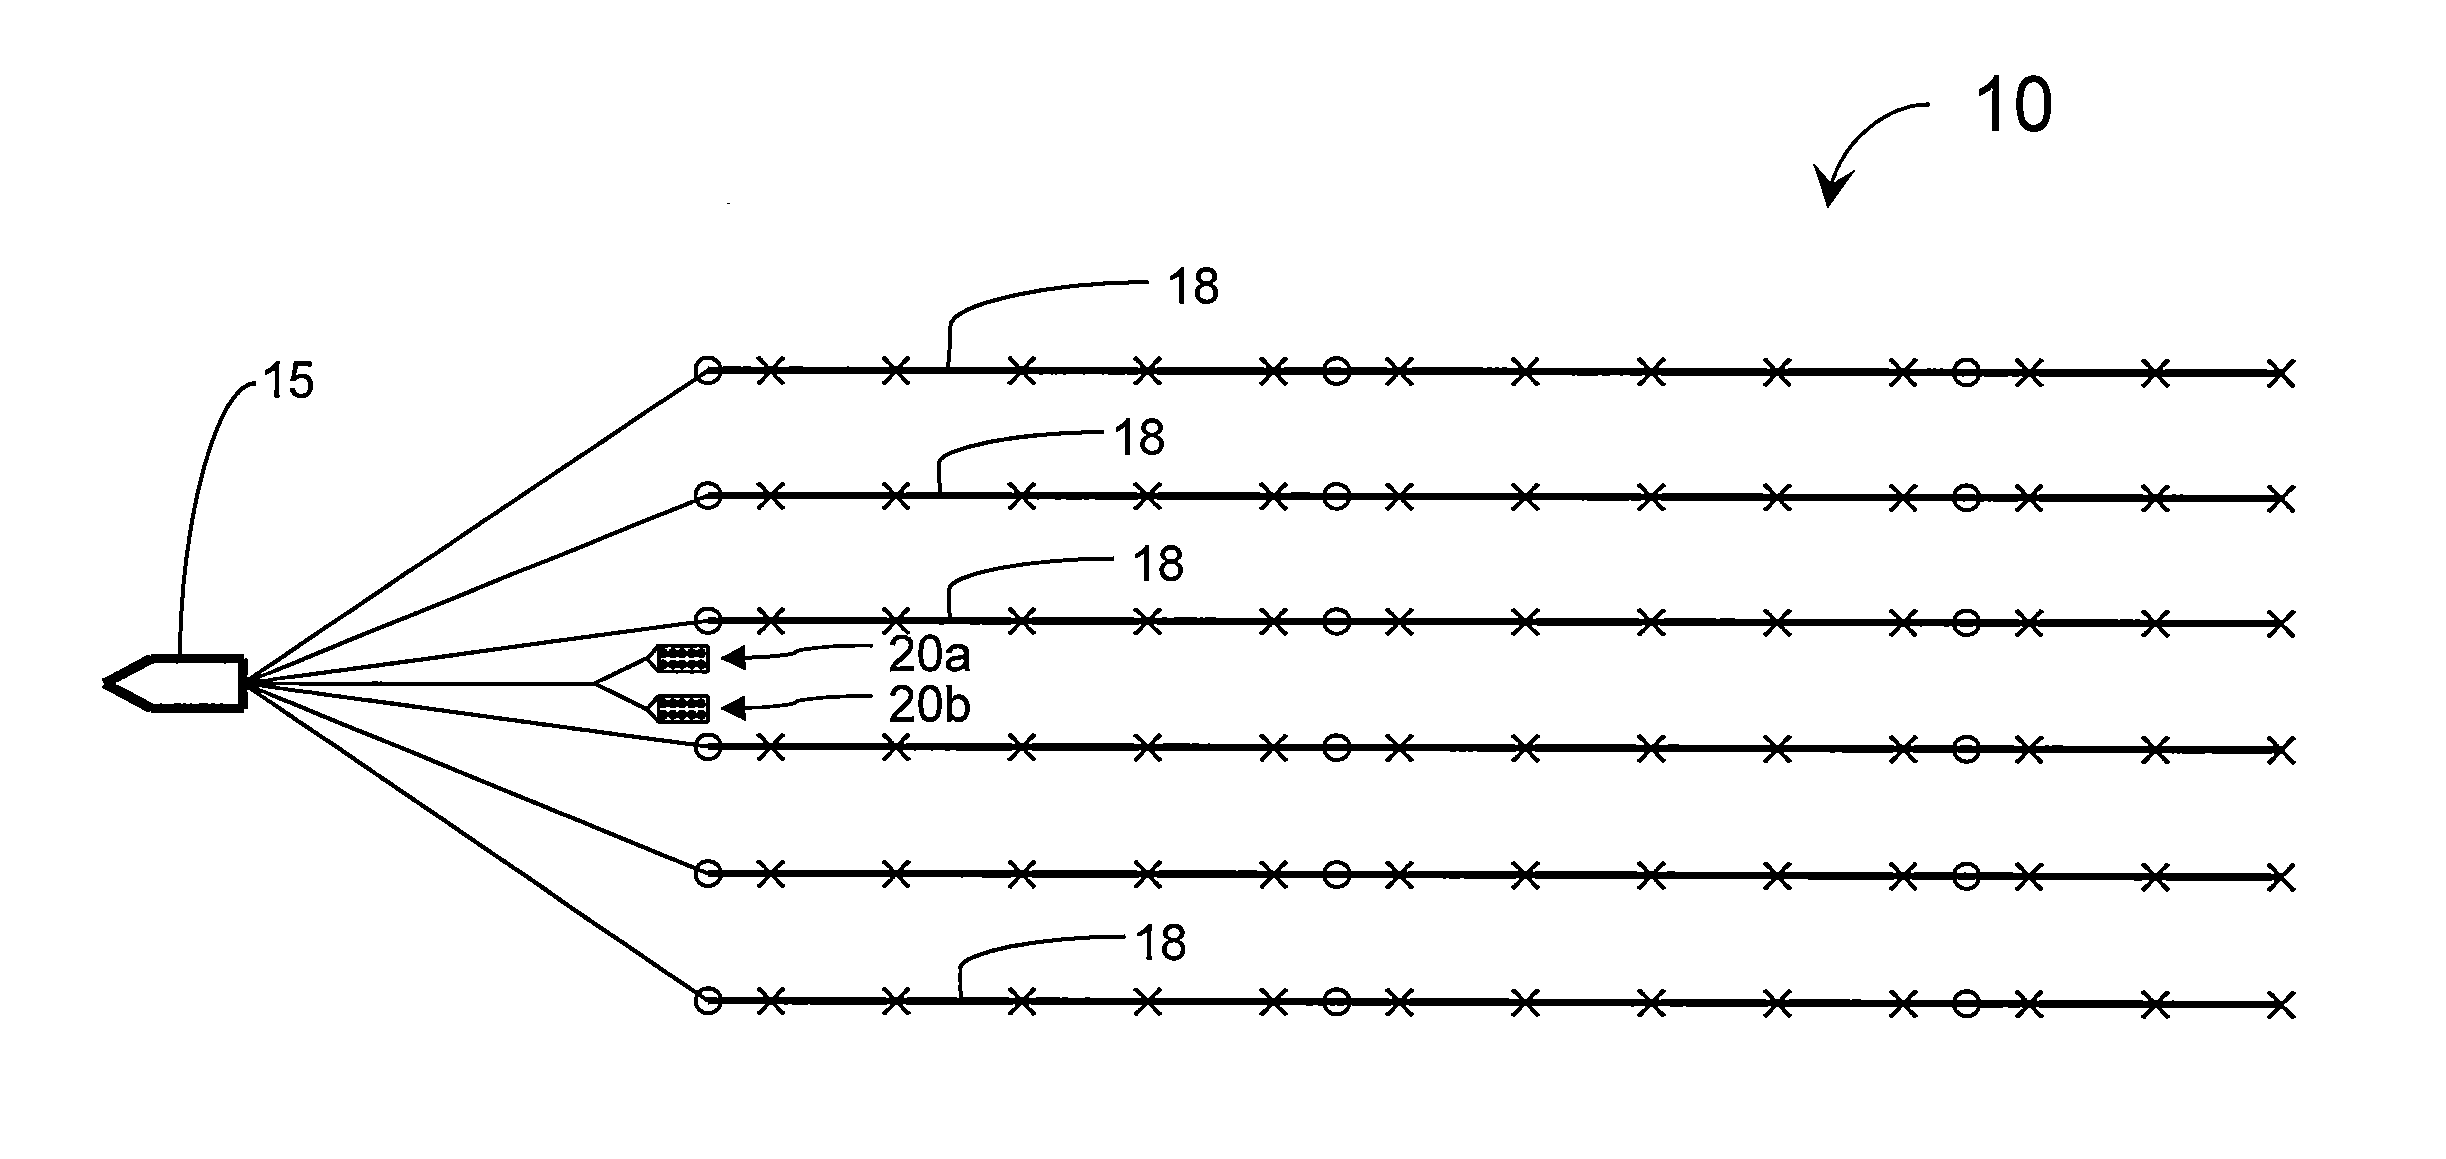 High density source spacing using continuous composite relatively adjusted pulse